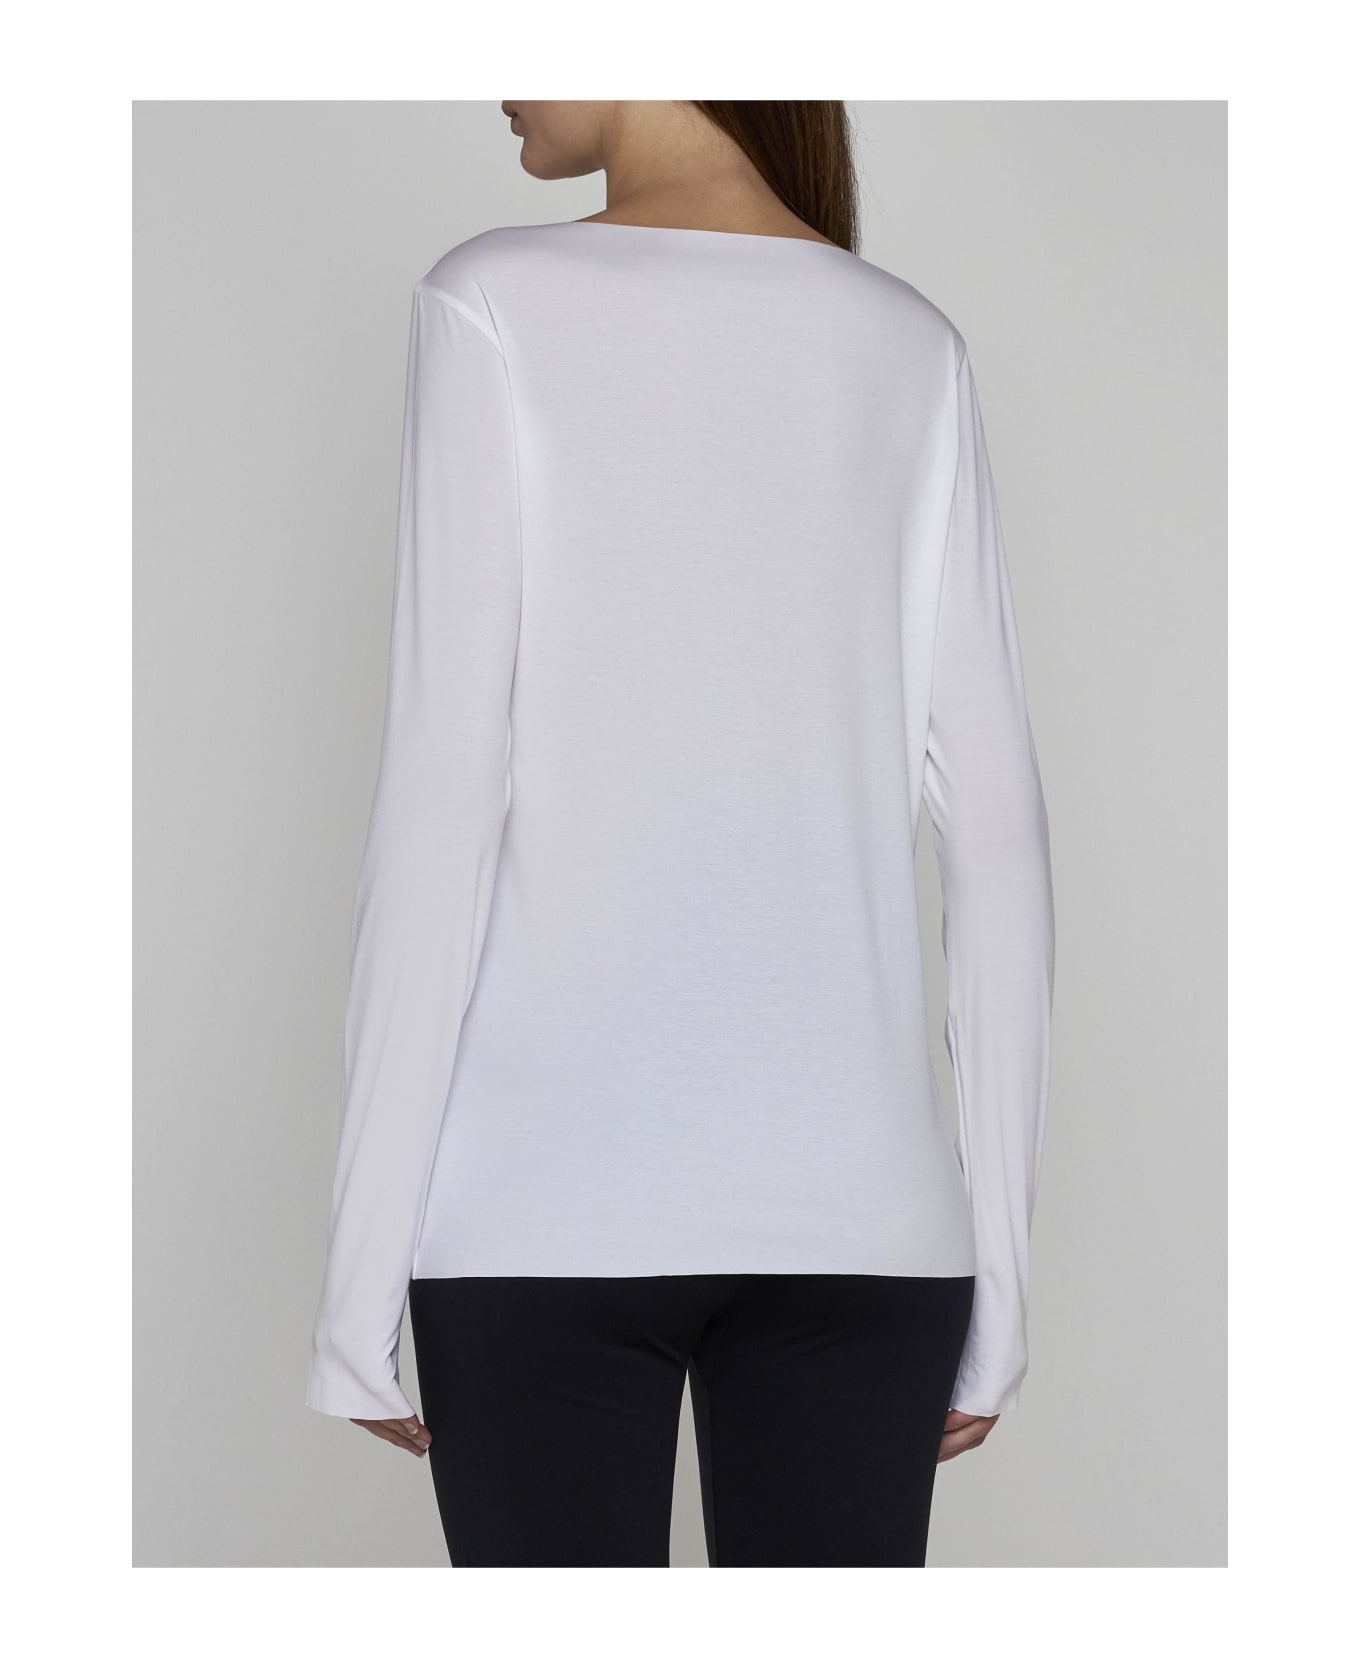 Wolford Aurora Long Sleeves Modal Top - White